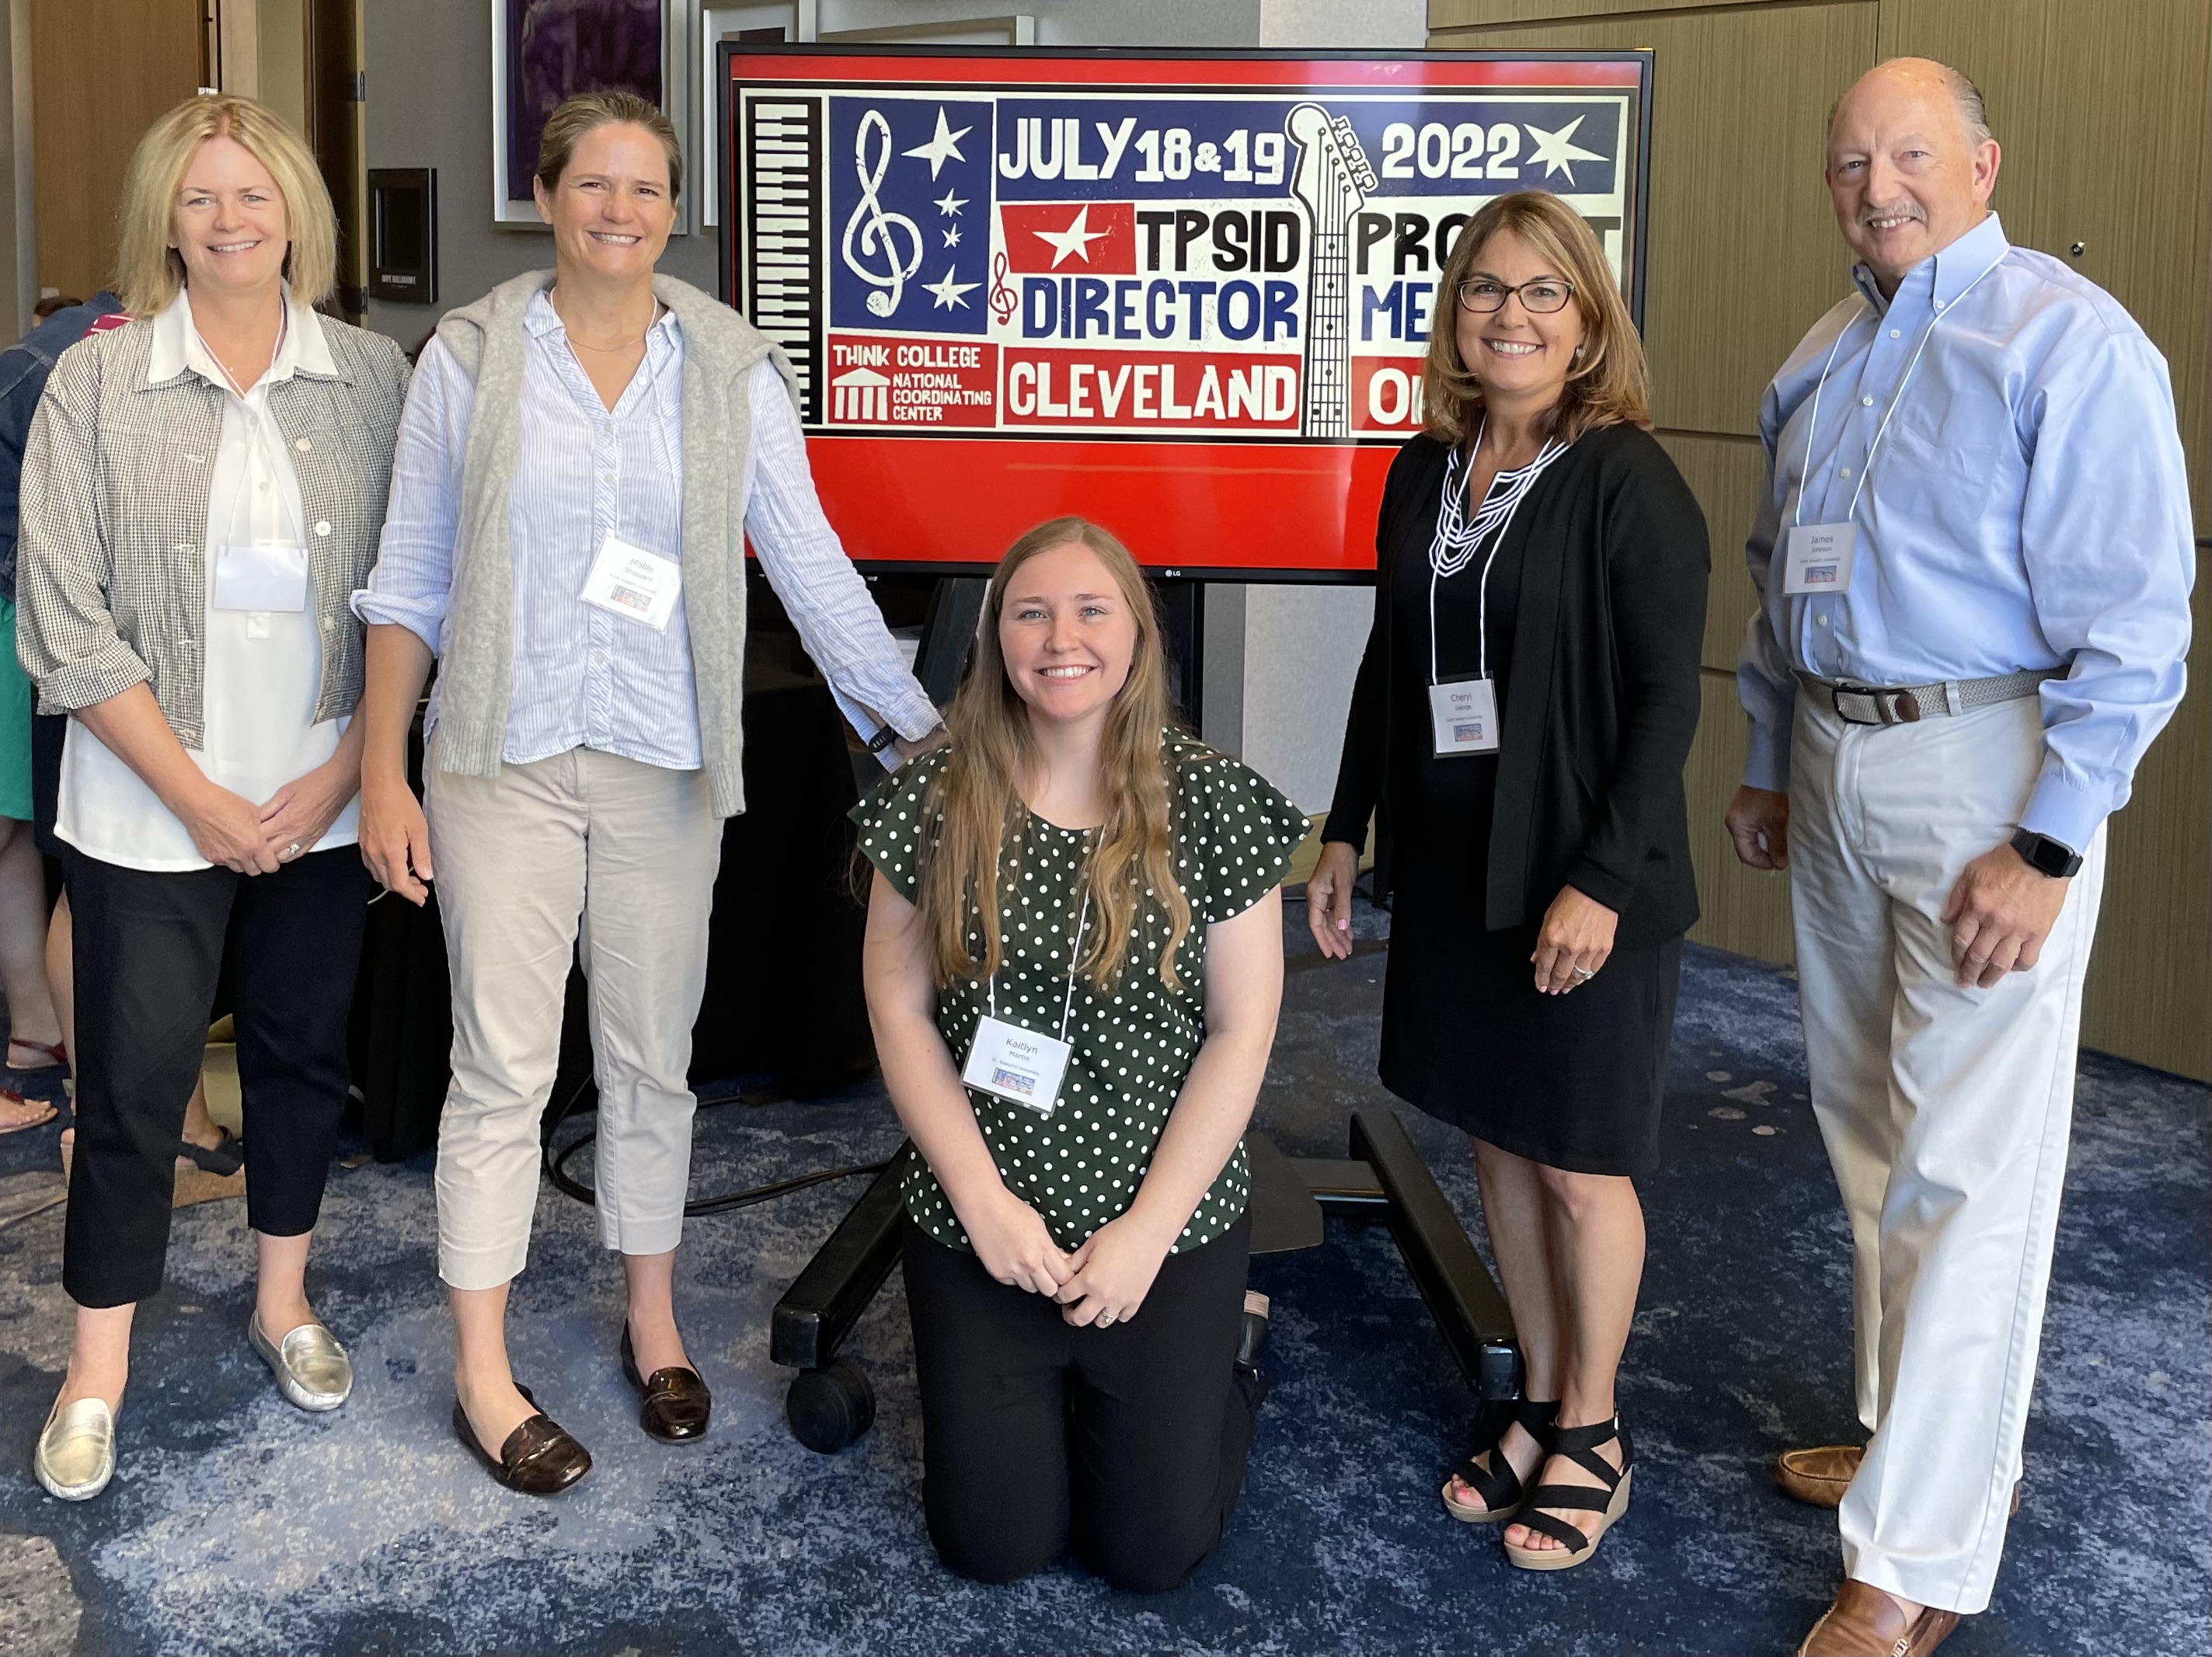 PACE Team members smiling in front of TPSID Project Director Meeting sign (From left to right: Rosemary Theveny, Dr. Mollie Sheppard, Kaitlyn Martin, Dr. Cheryl George, Dr. James Johnson)